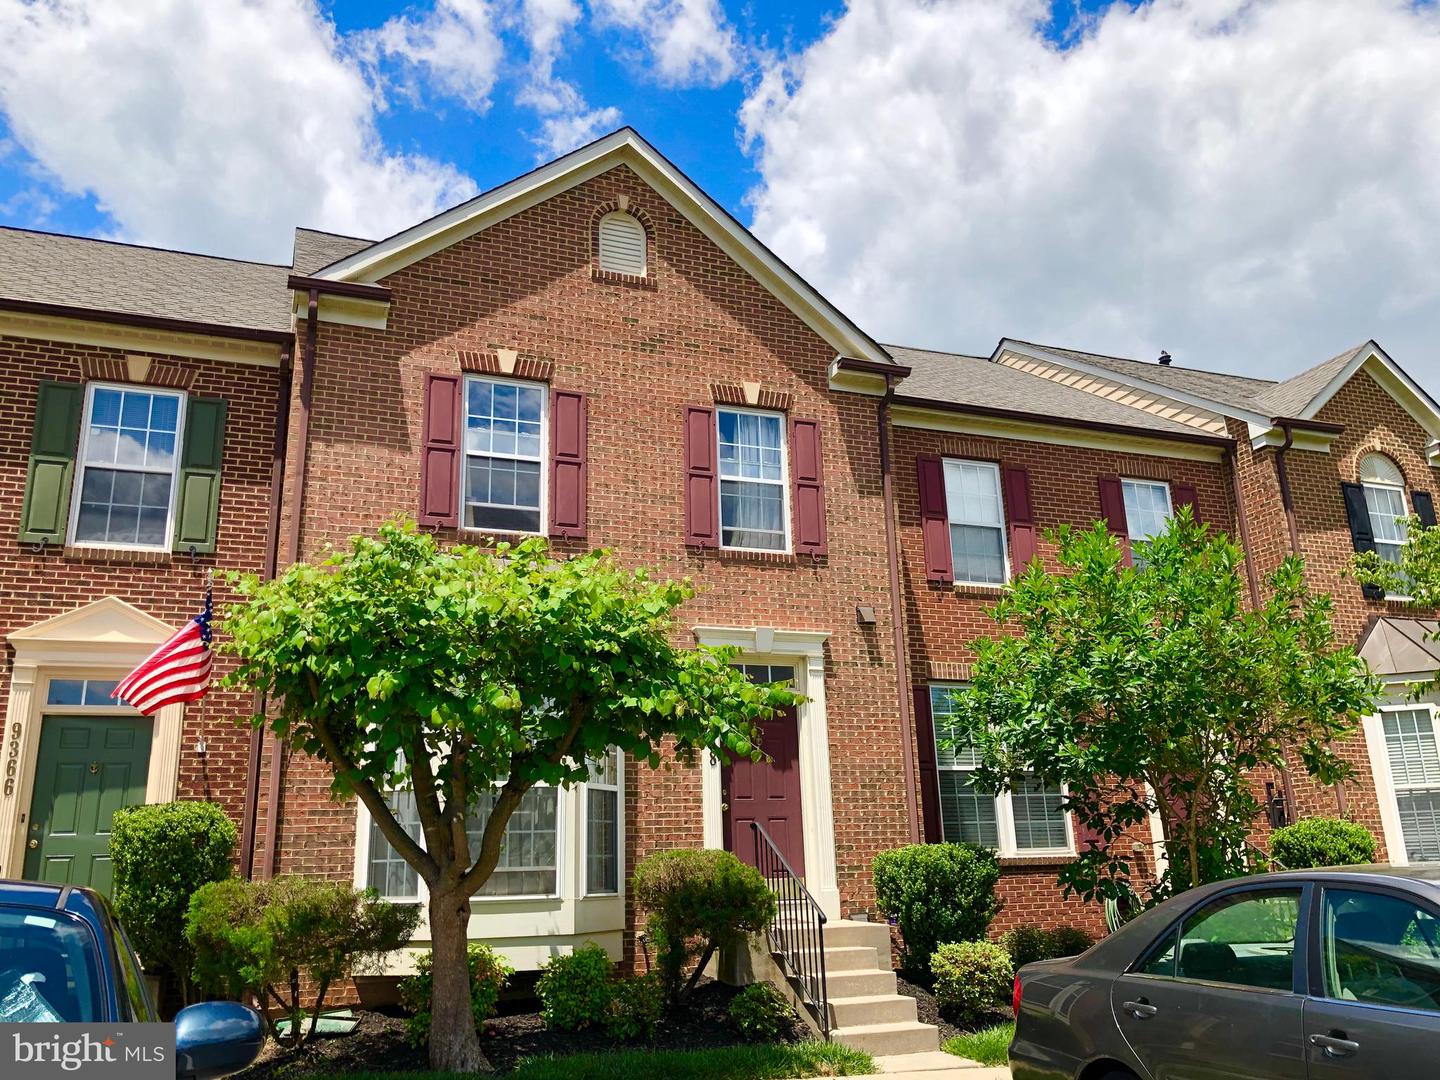 View Frederick, MD 21704 townhome